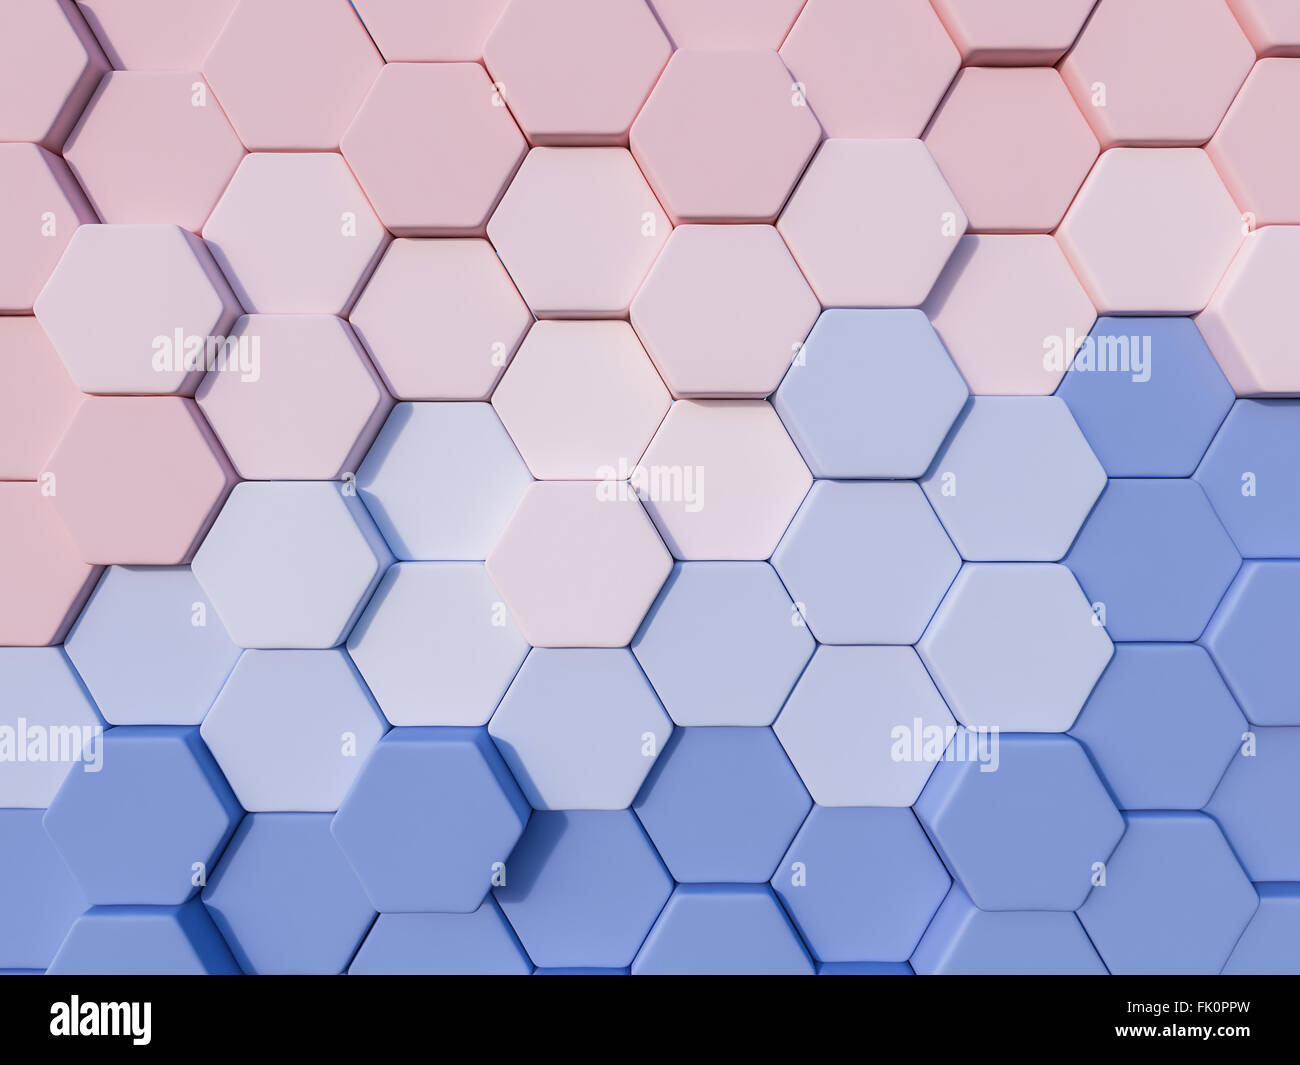 Serenity Blue And Rose Quartz Abstract 3d Hexagon Background